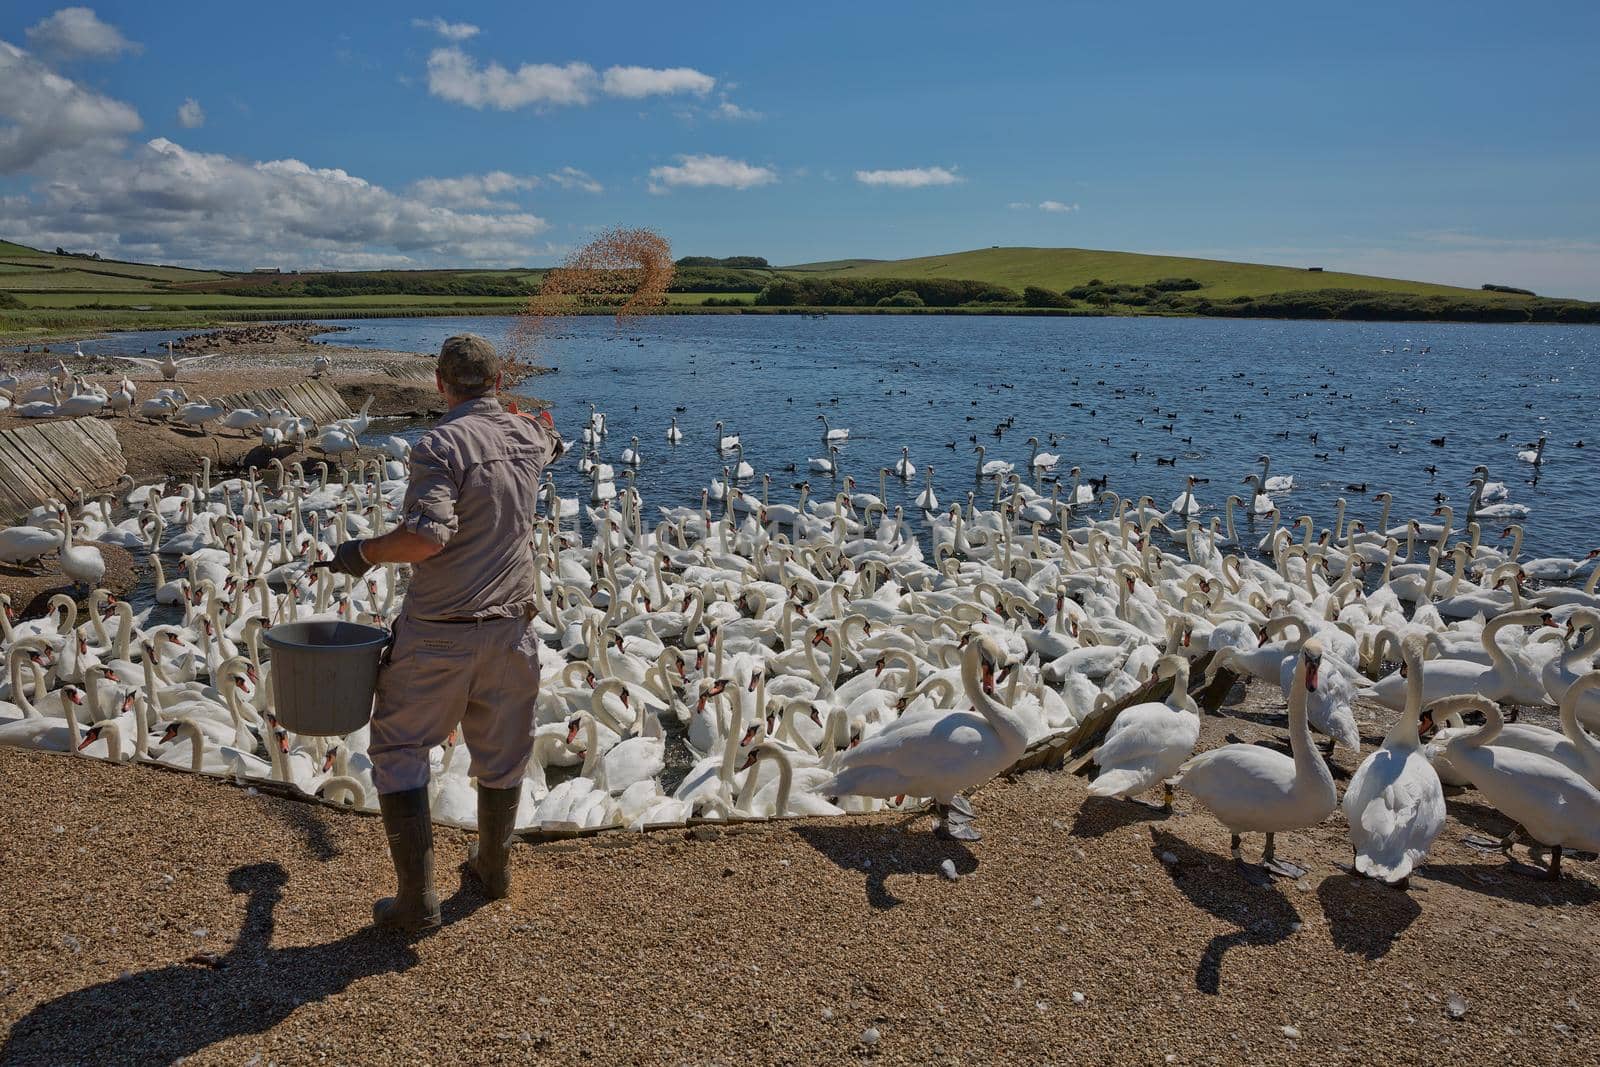 Feeding time at the Abbotsbury Swannery in Dorset UK by wondry